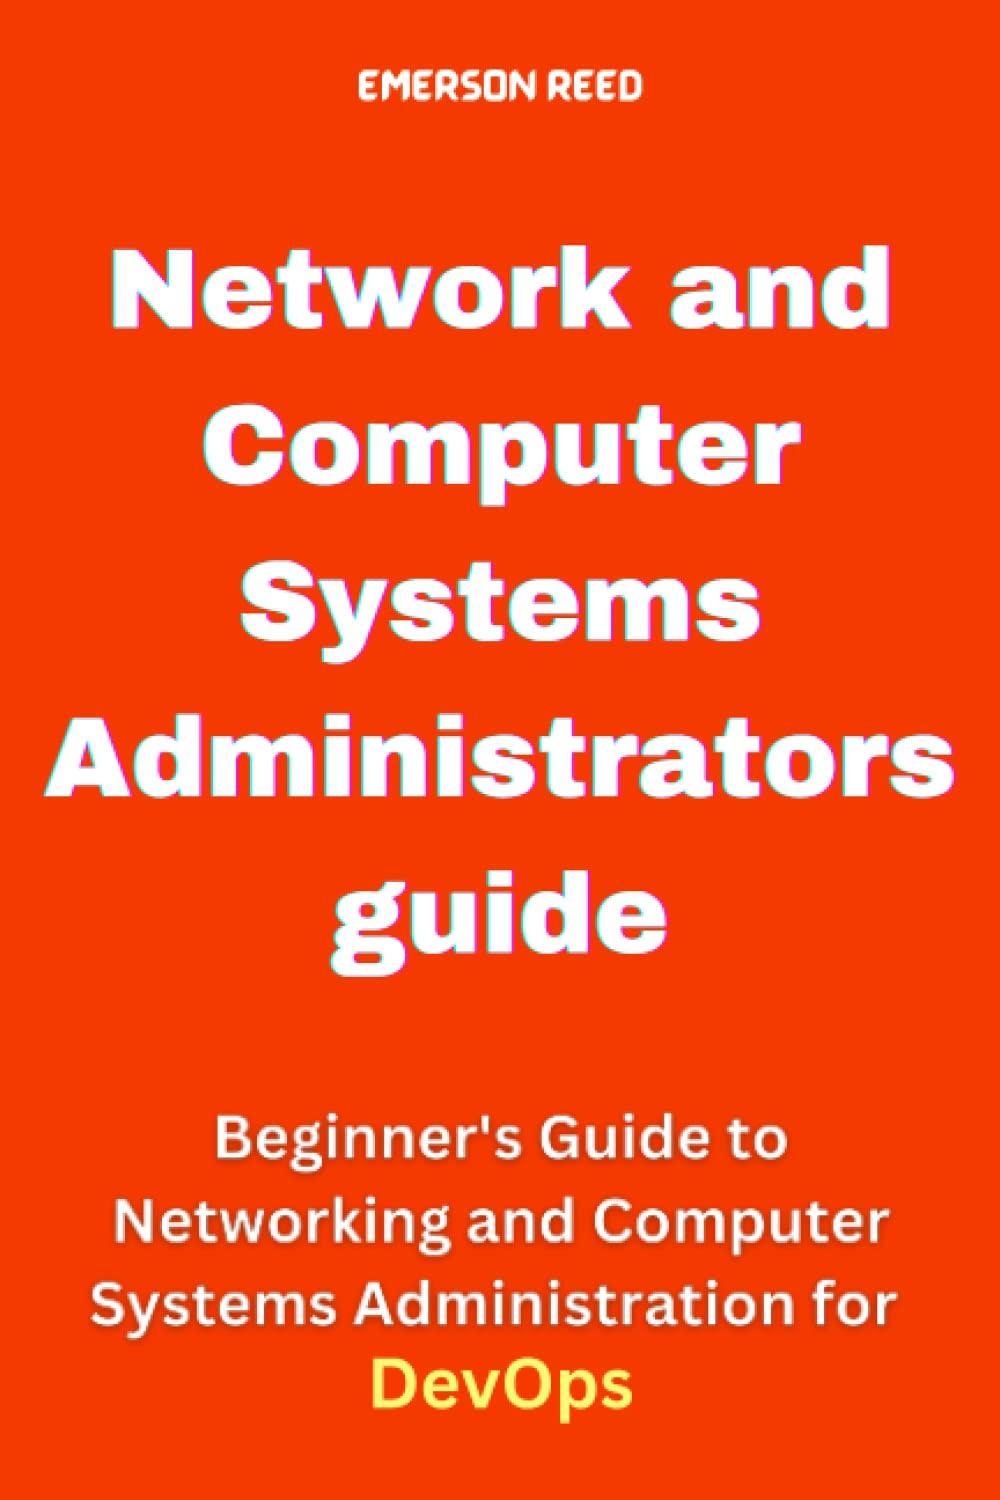 network and computer systems administrators guide  beginner's guide to networking and computer systems